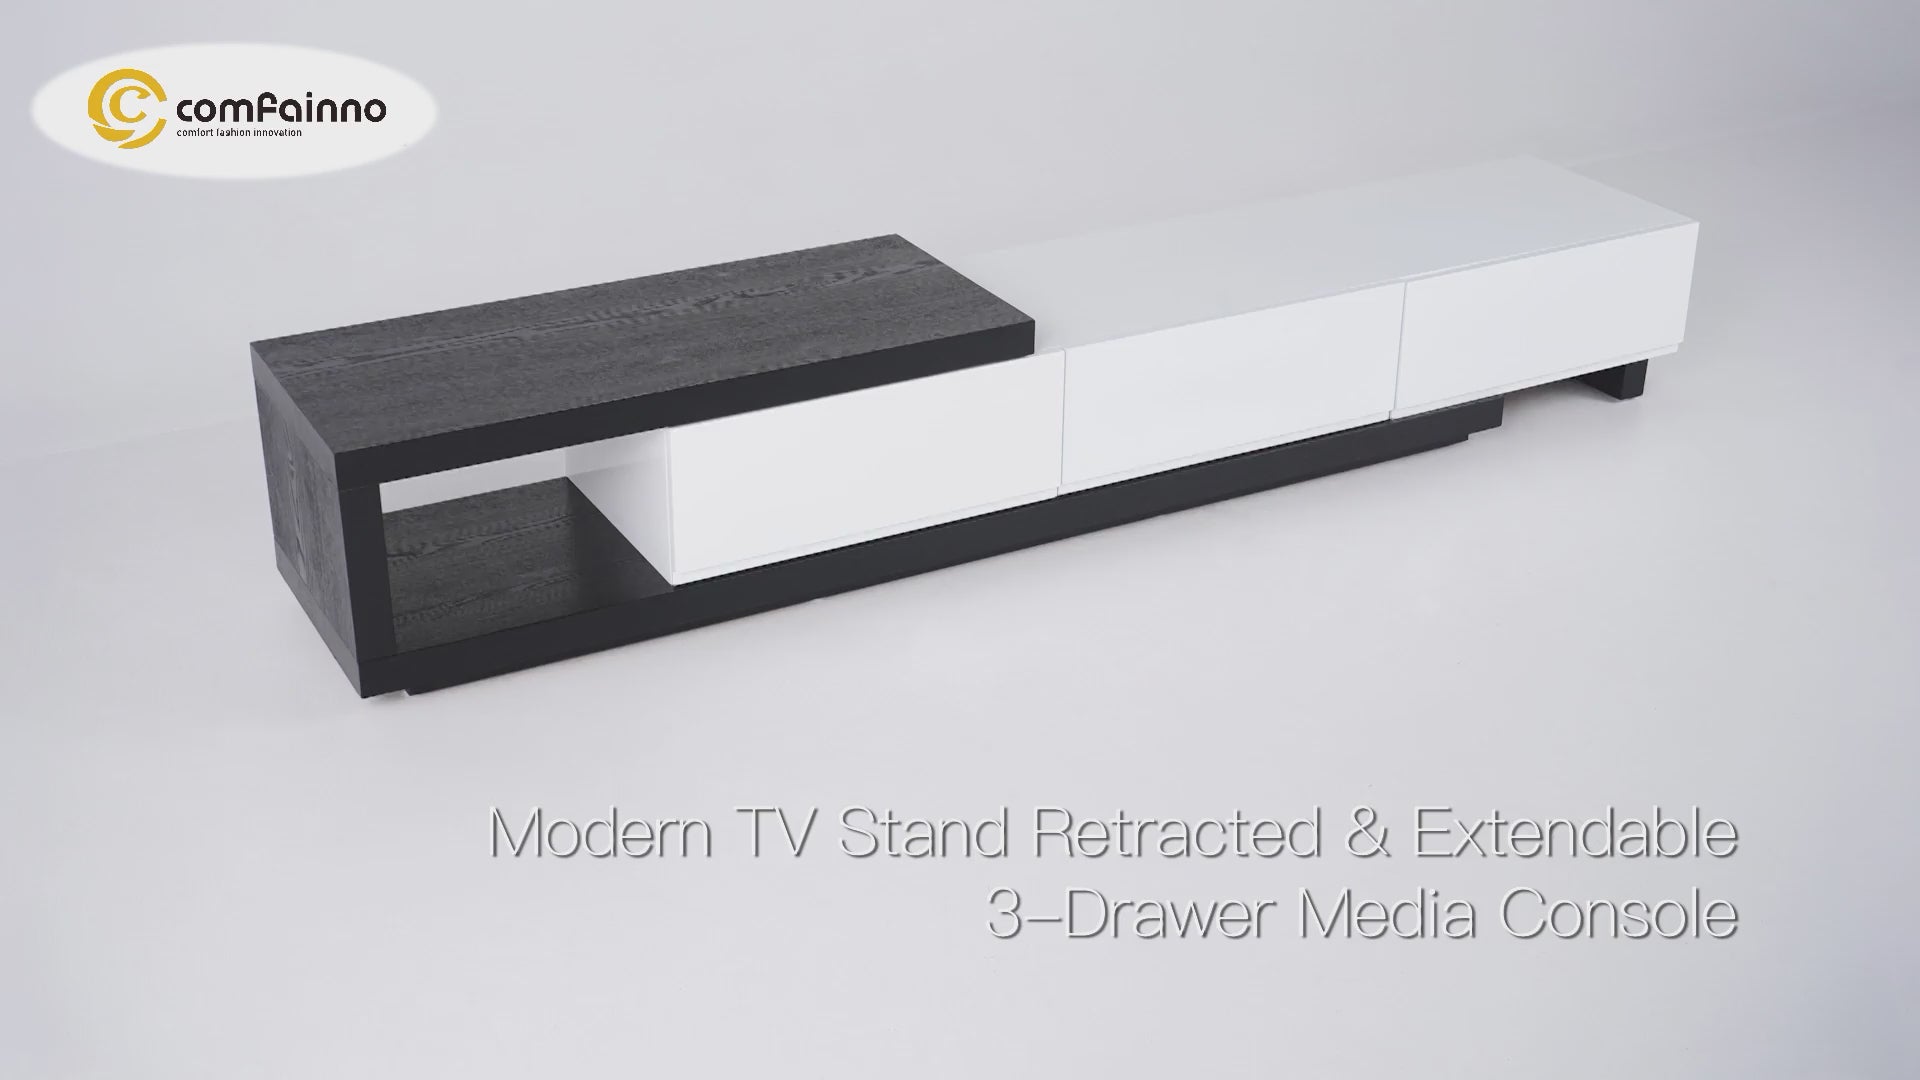 Quoint Modern TV Stand Retracted & Extendable 3-Drawer Media Console White & Black